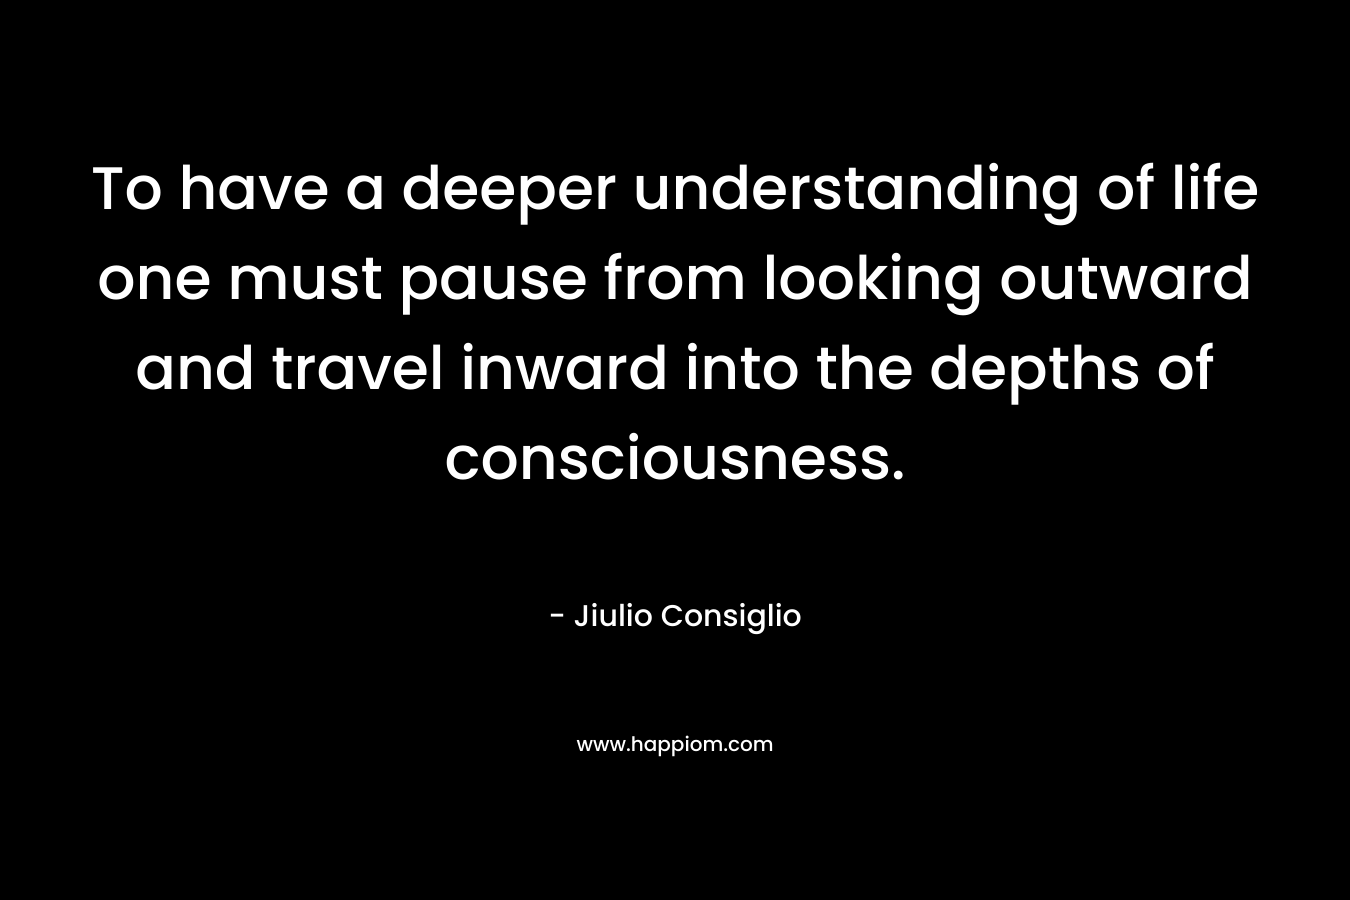 To have a deeper understanding of life one must pause from looking outward and travel inward into the depths of consciousness.